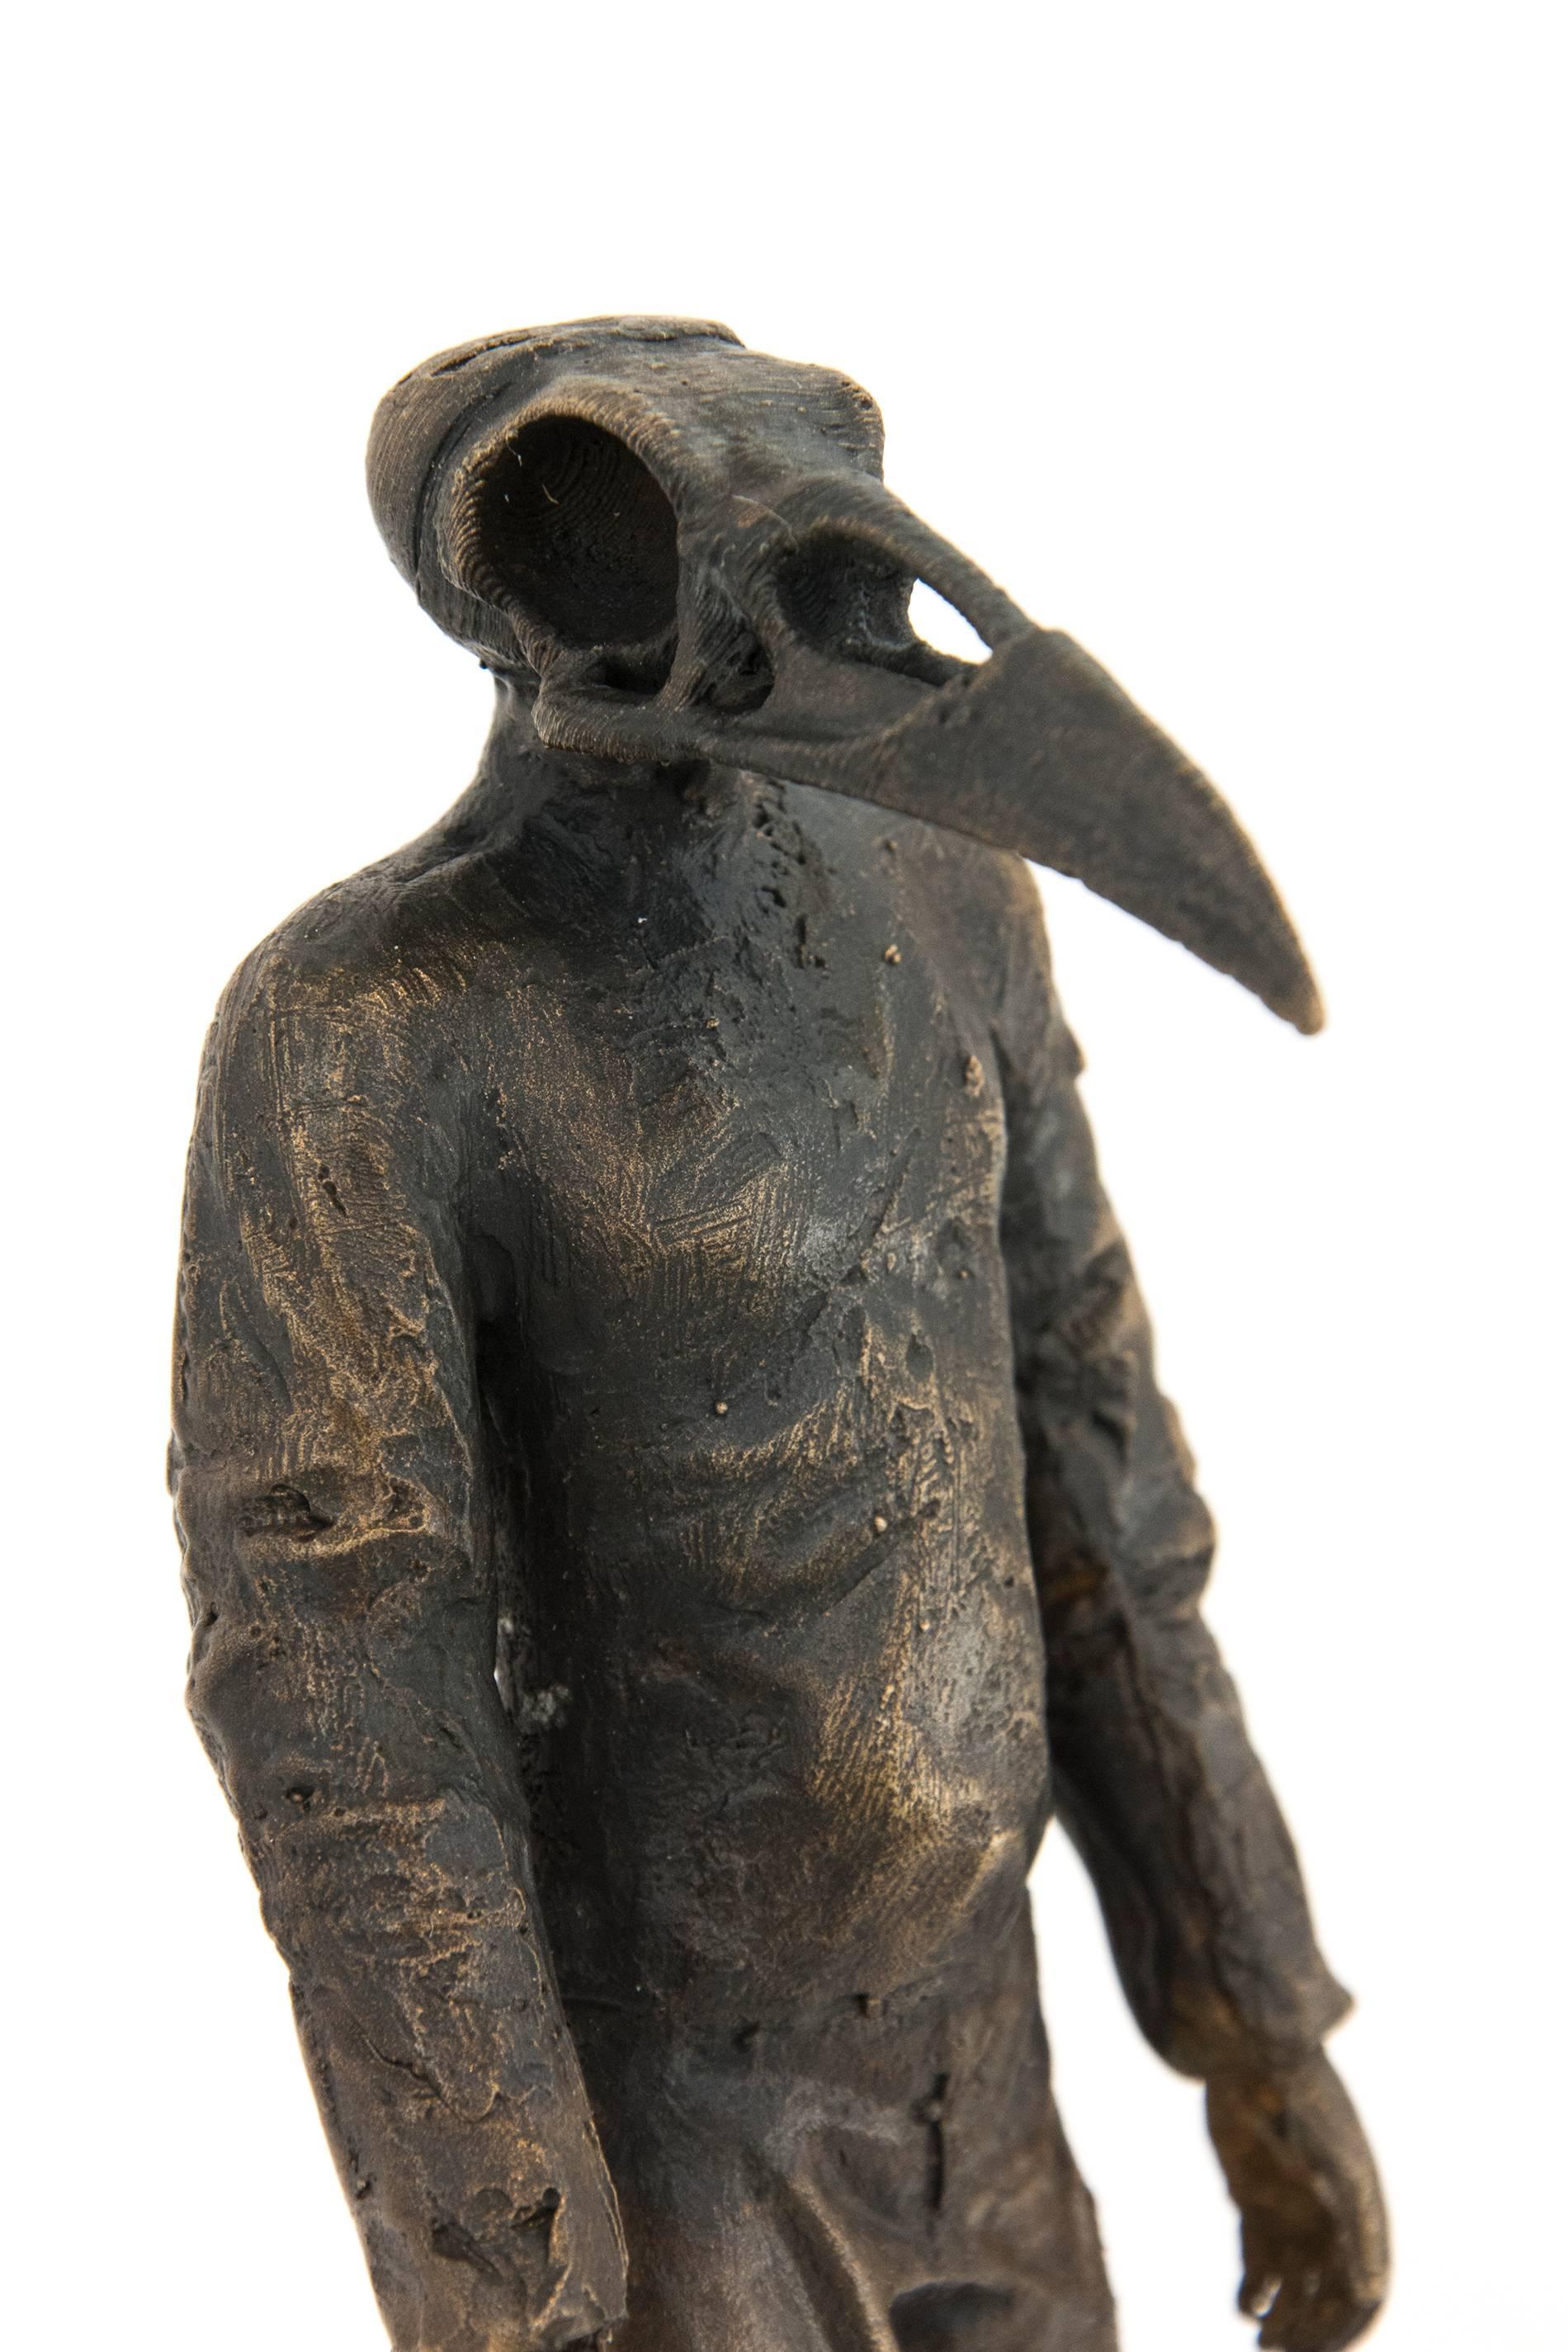 A fully clothed action figure with a raven's skull as a head is cast in bronze. The enigmatic figure teeters on its heels, perched like a bird on a short bronze branch. In this work, the artist draws on the themes of darkness and mystery often